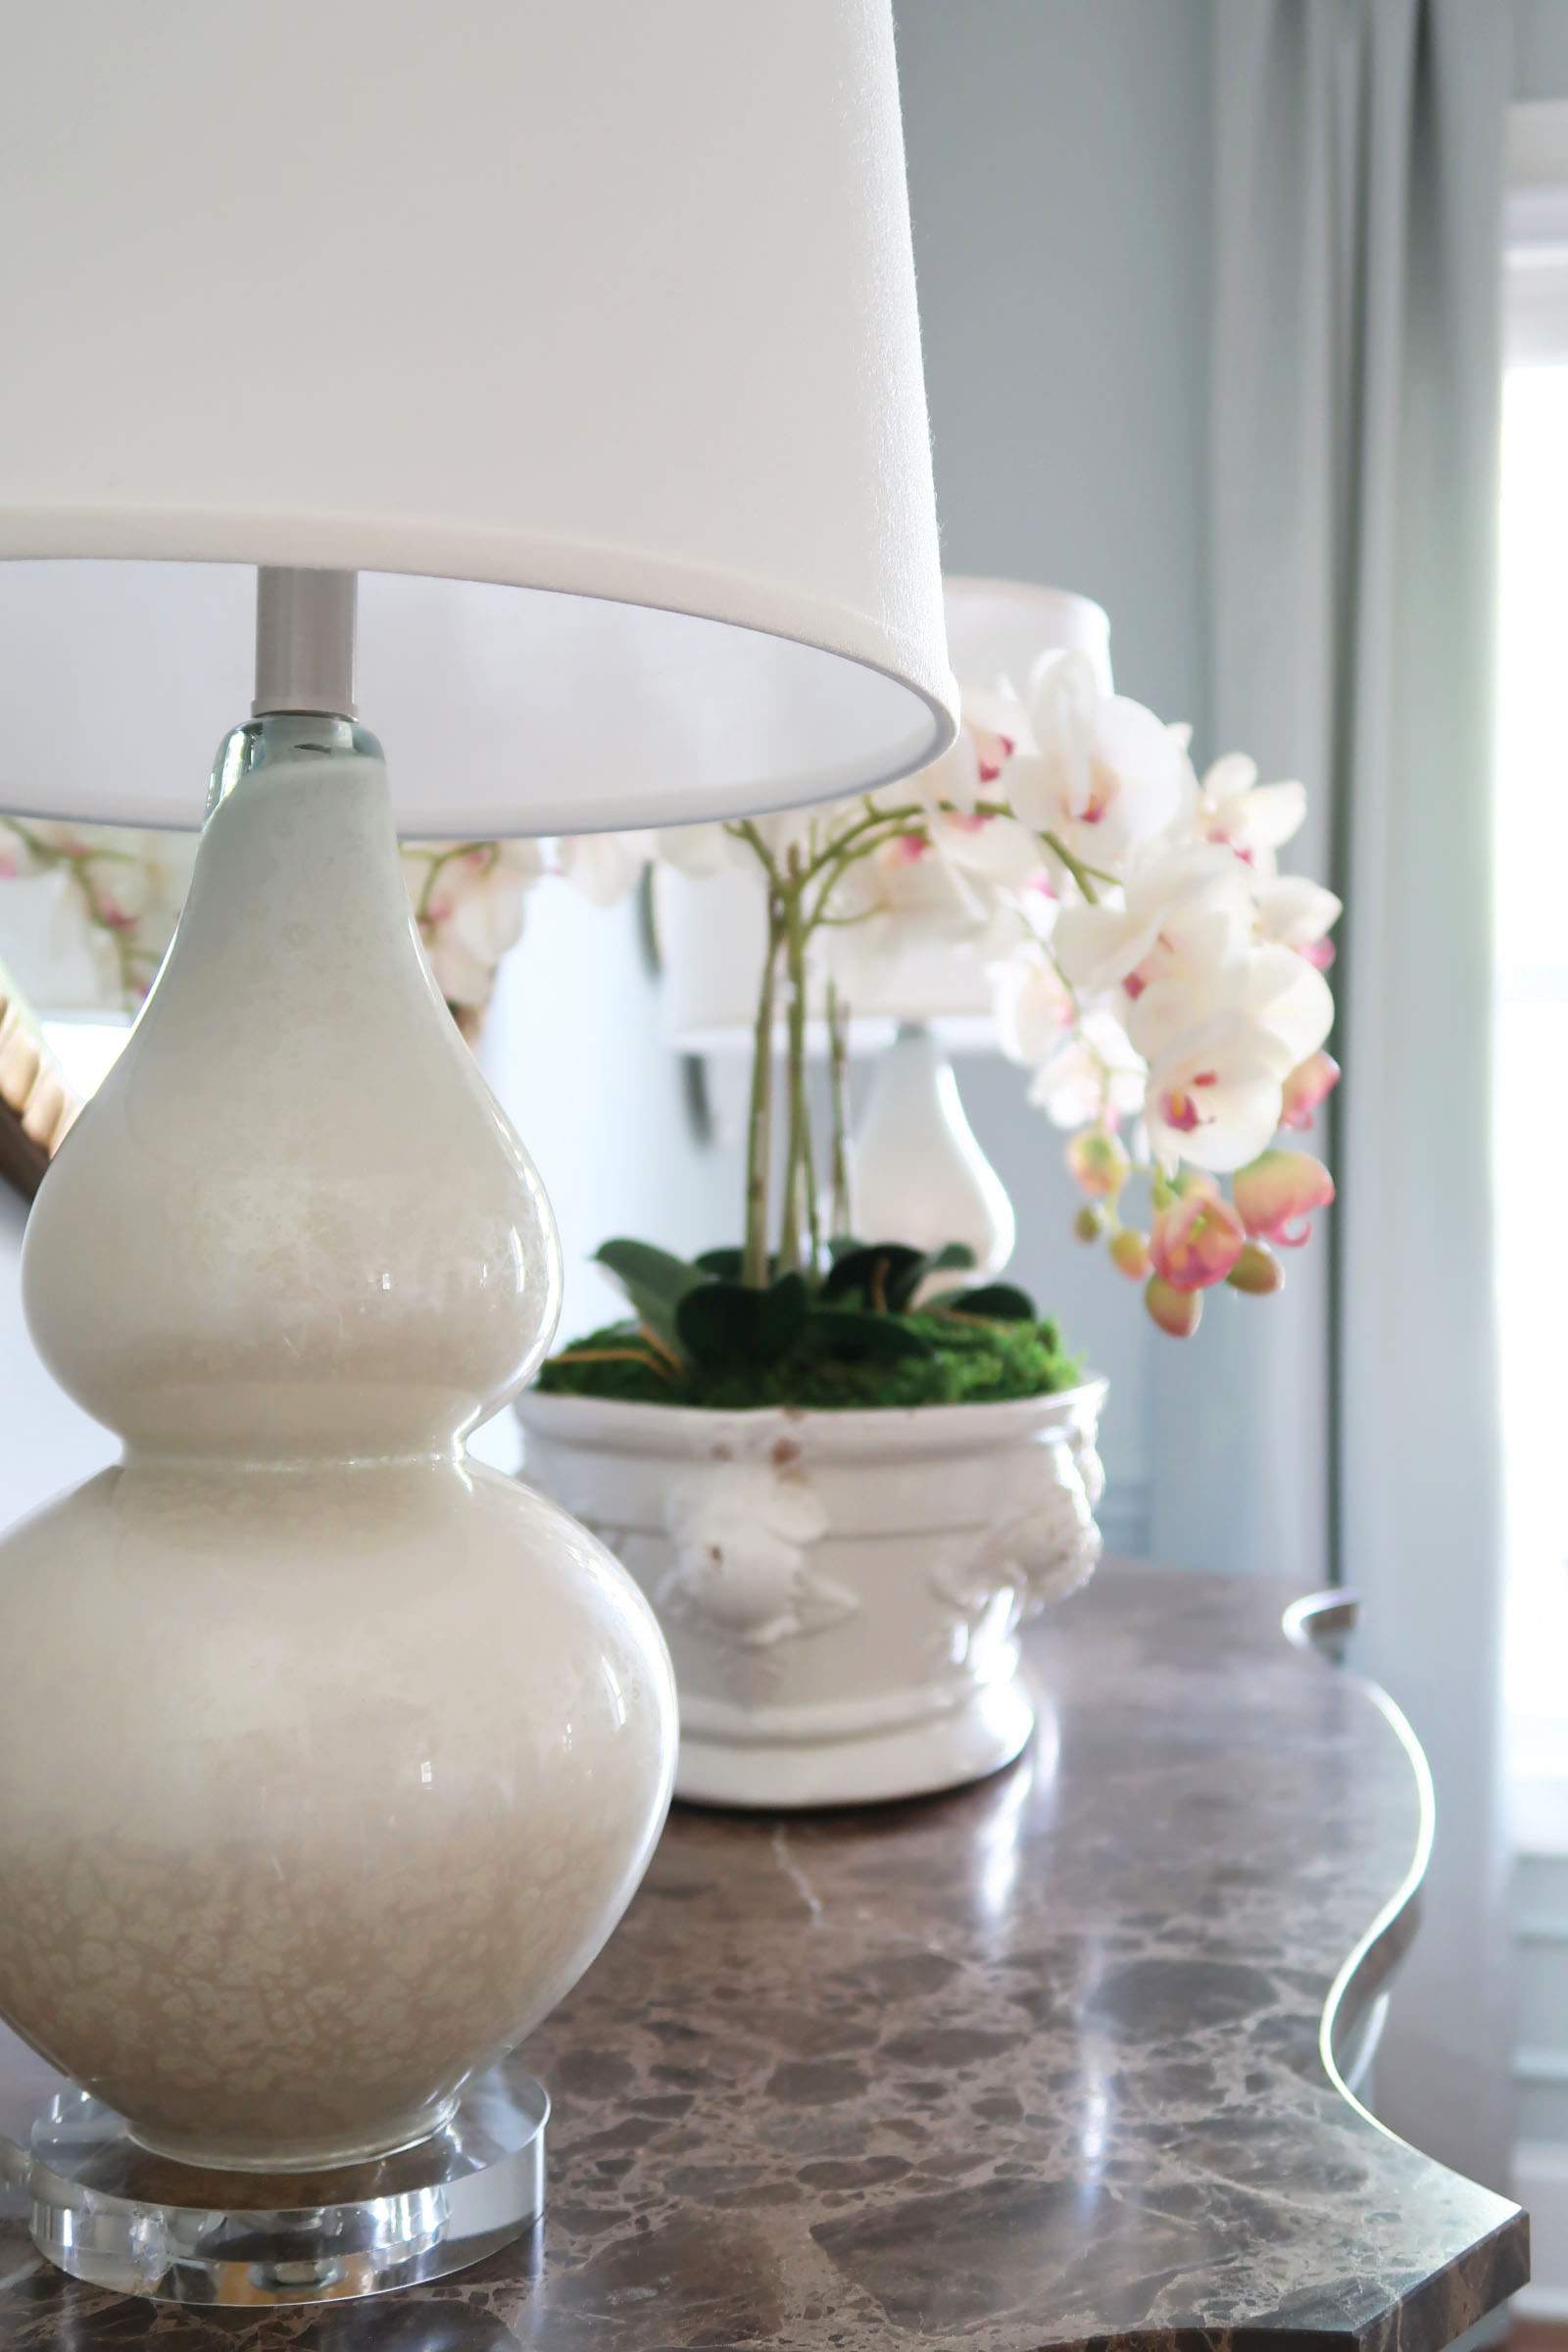 Two Pearlized Lamps on Credenza